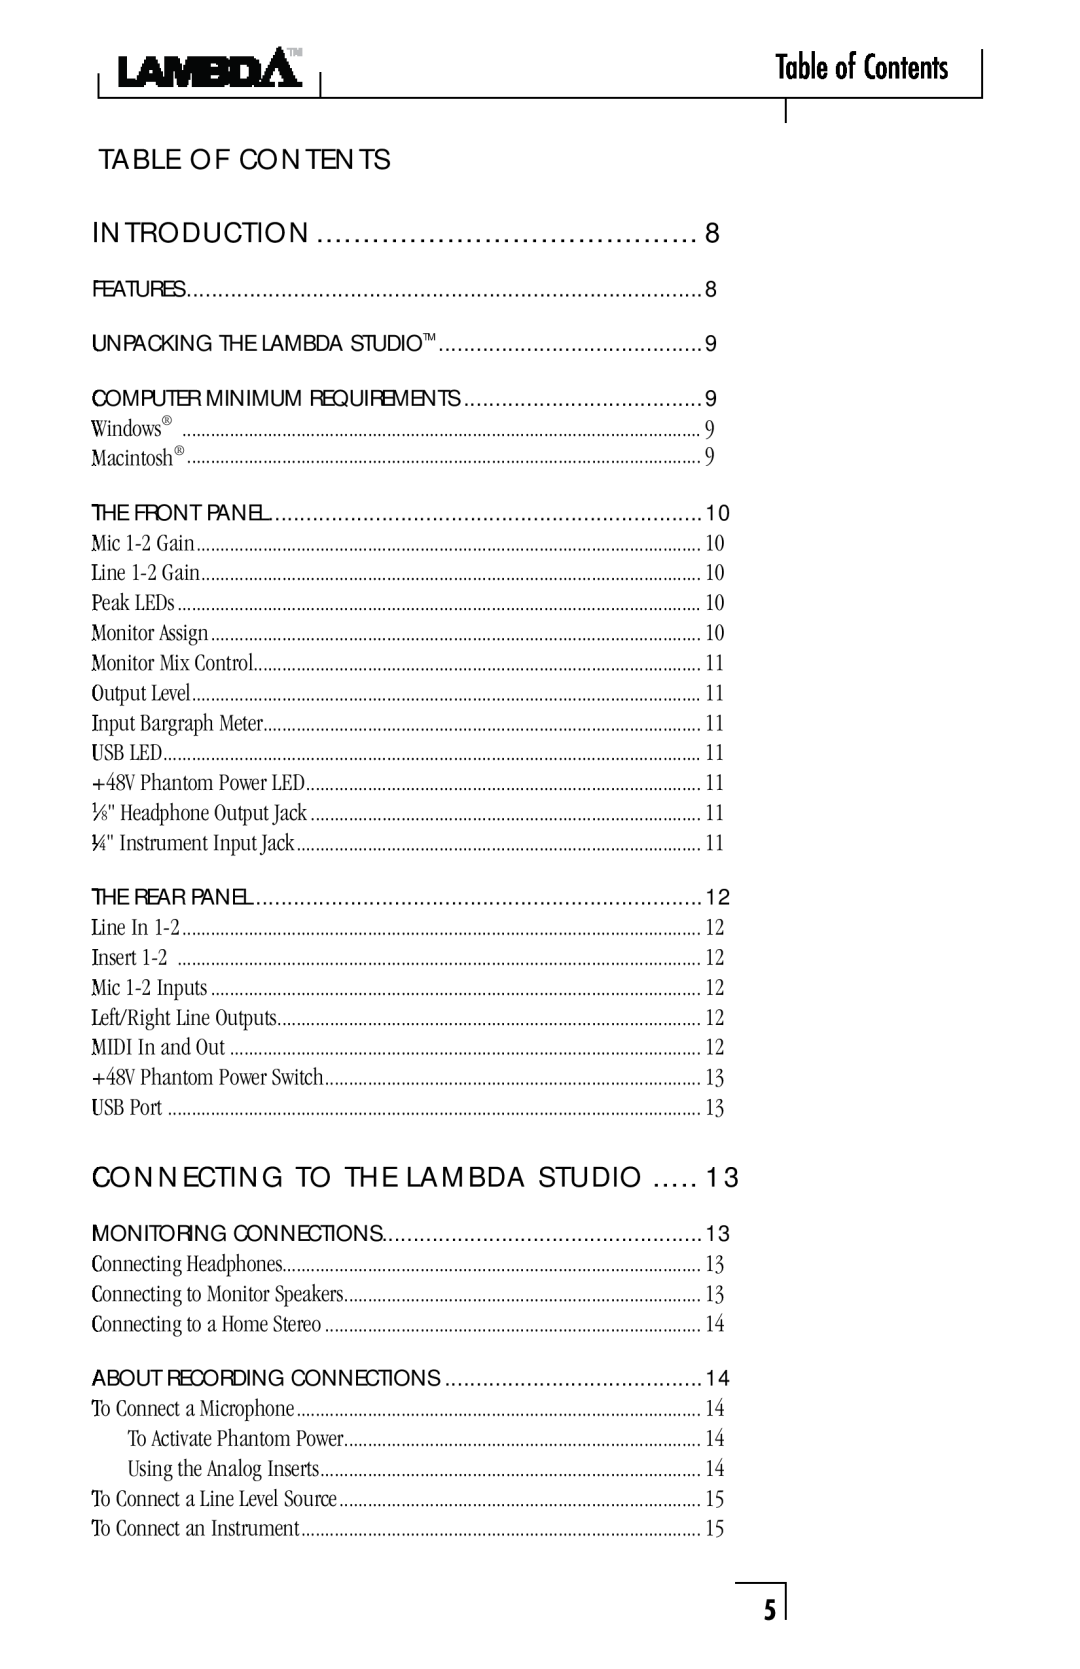 Lexicon Lambda Desktop Recording Studio owner manual Table of Contents, TaBLe of Contents, IntroDuction 